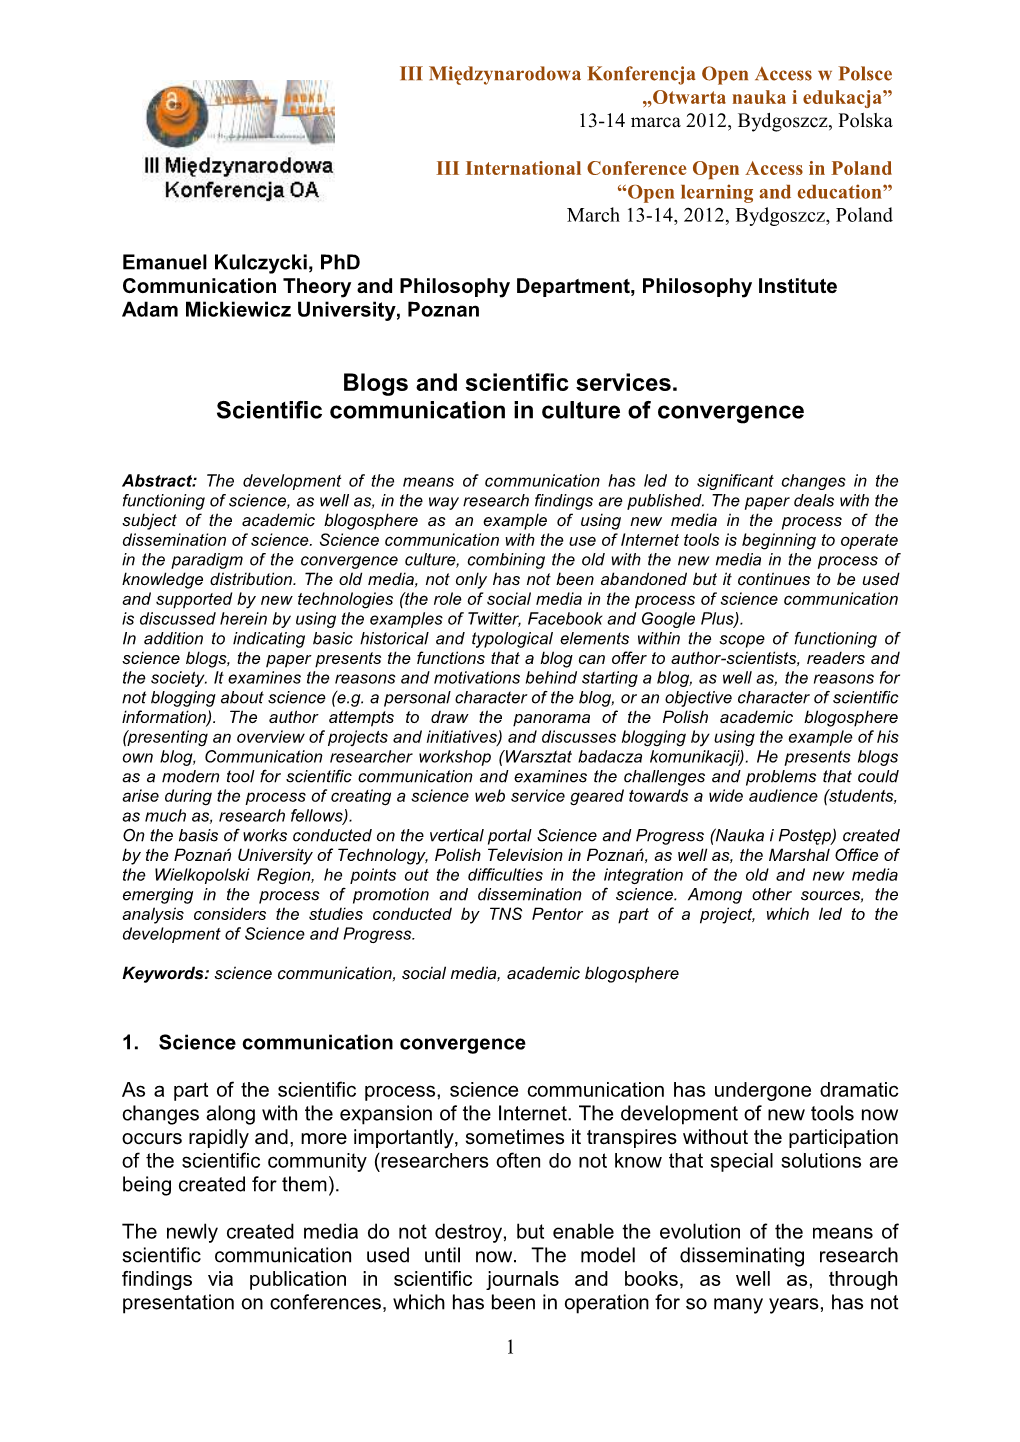 Blogs and Scientific Services. Scientific Communication in the Culture of Convergence